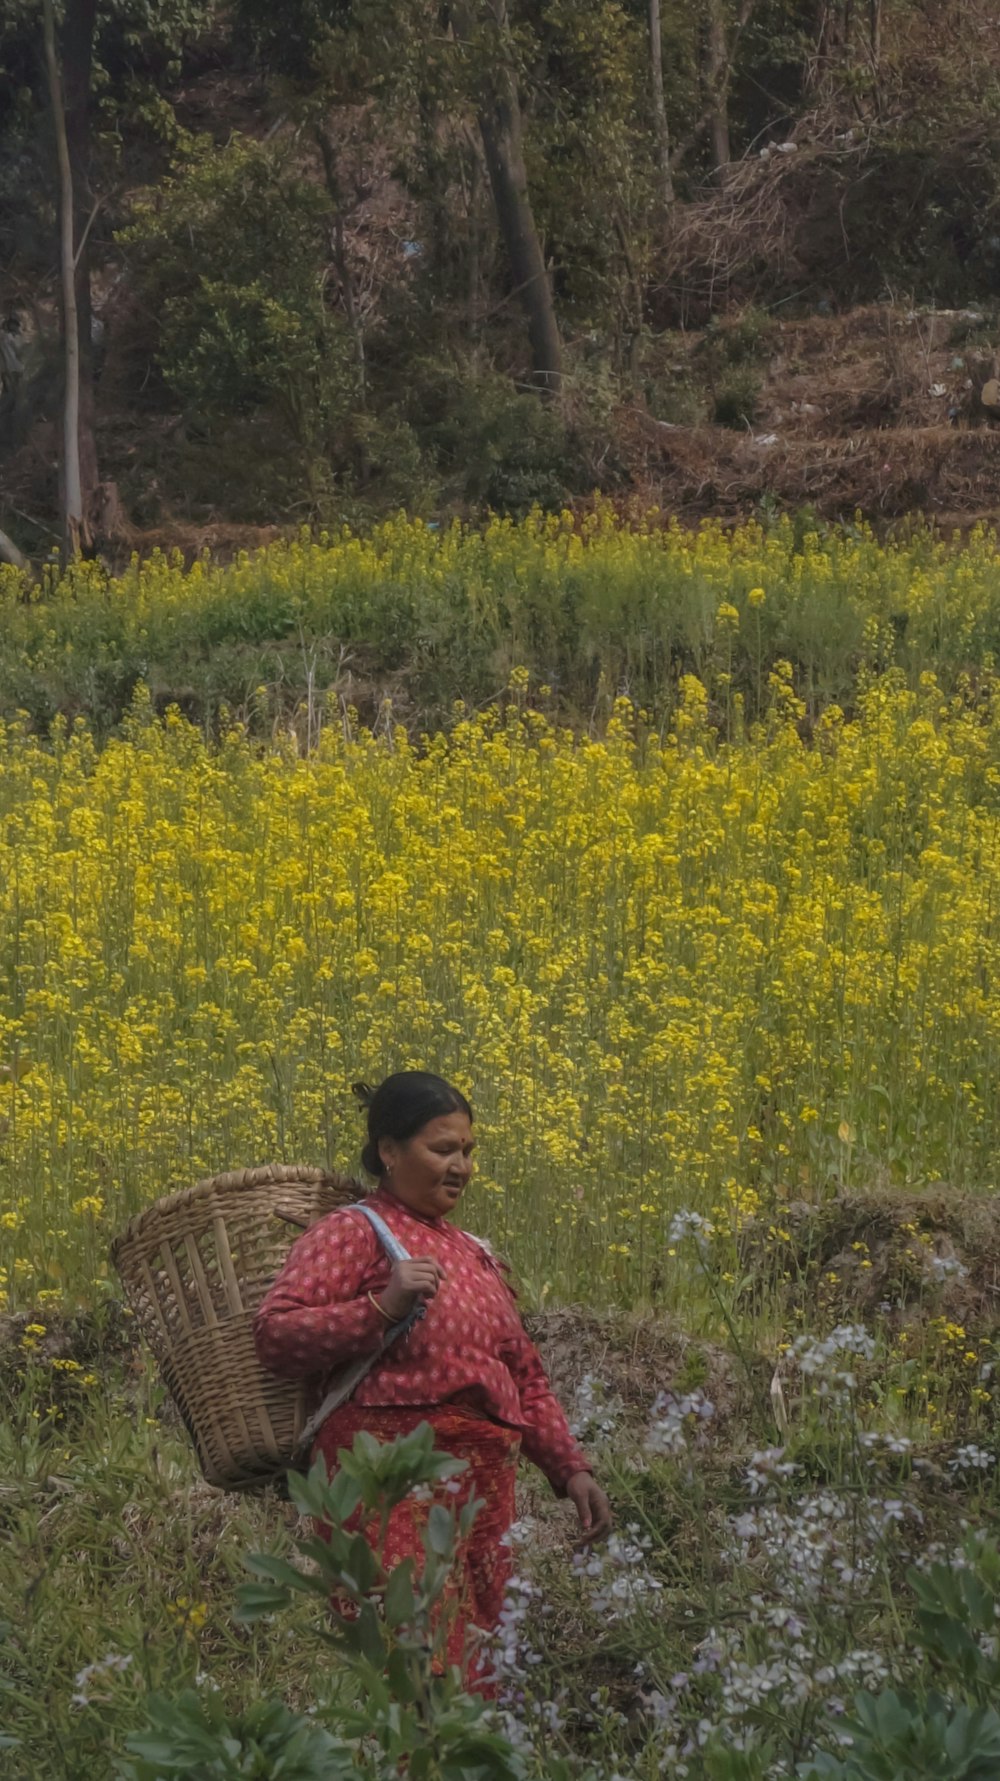 a woman carrying a basket in a field of flowers